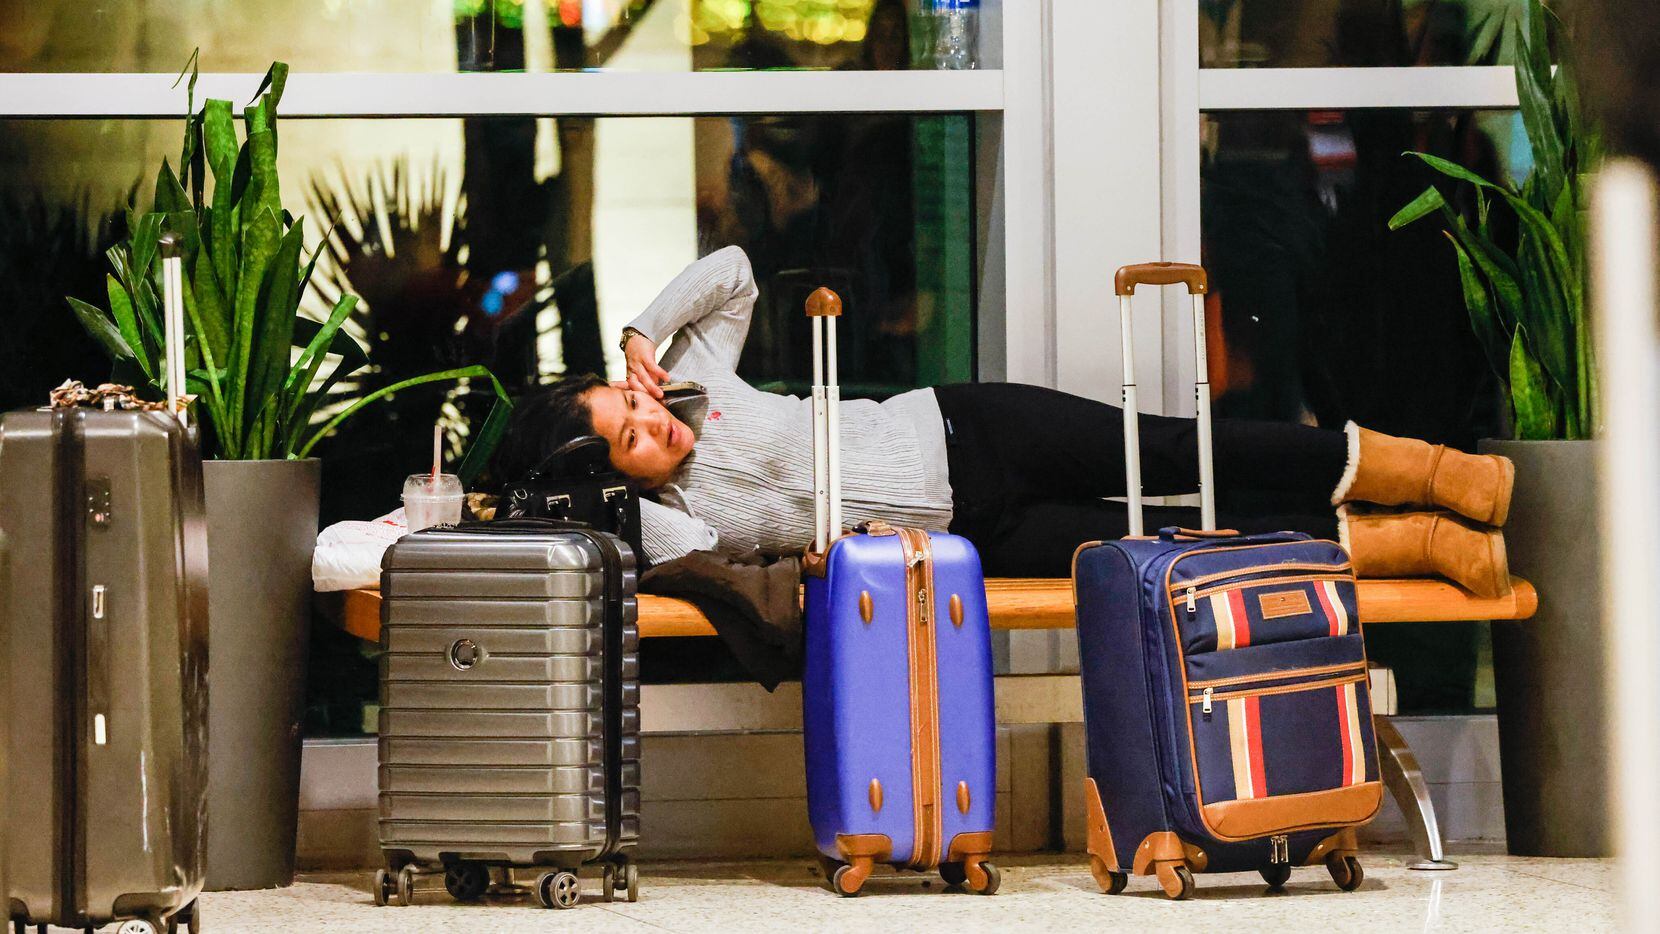 Vicky Bo lies on a bench after her flight to San Jose, Calif., was canceled atDallas Love...